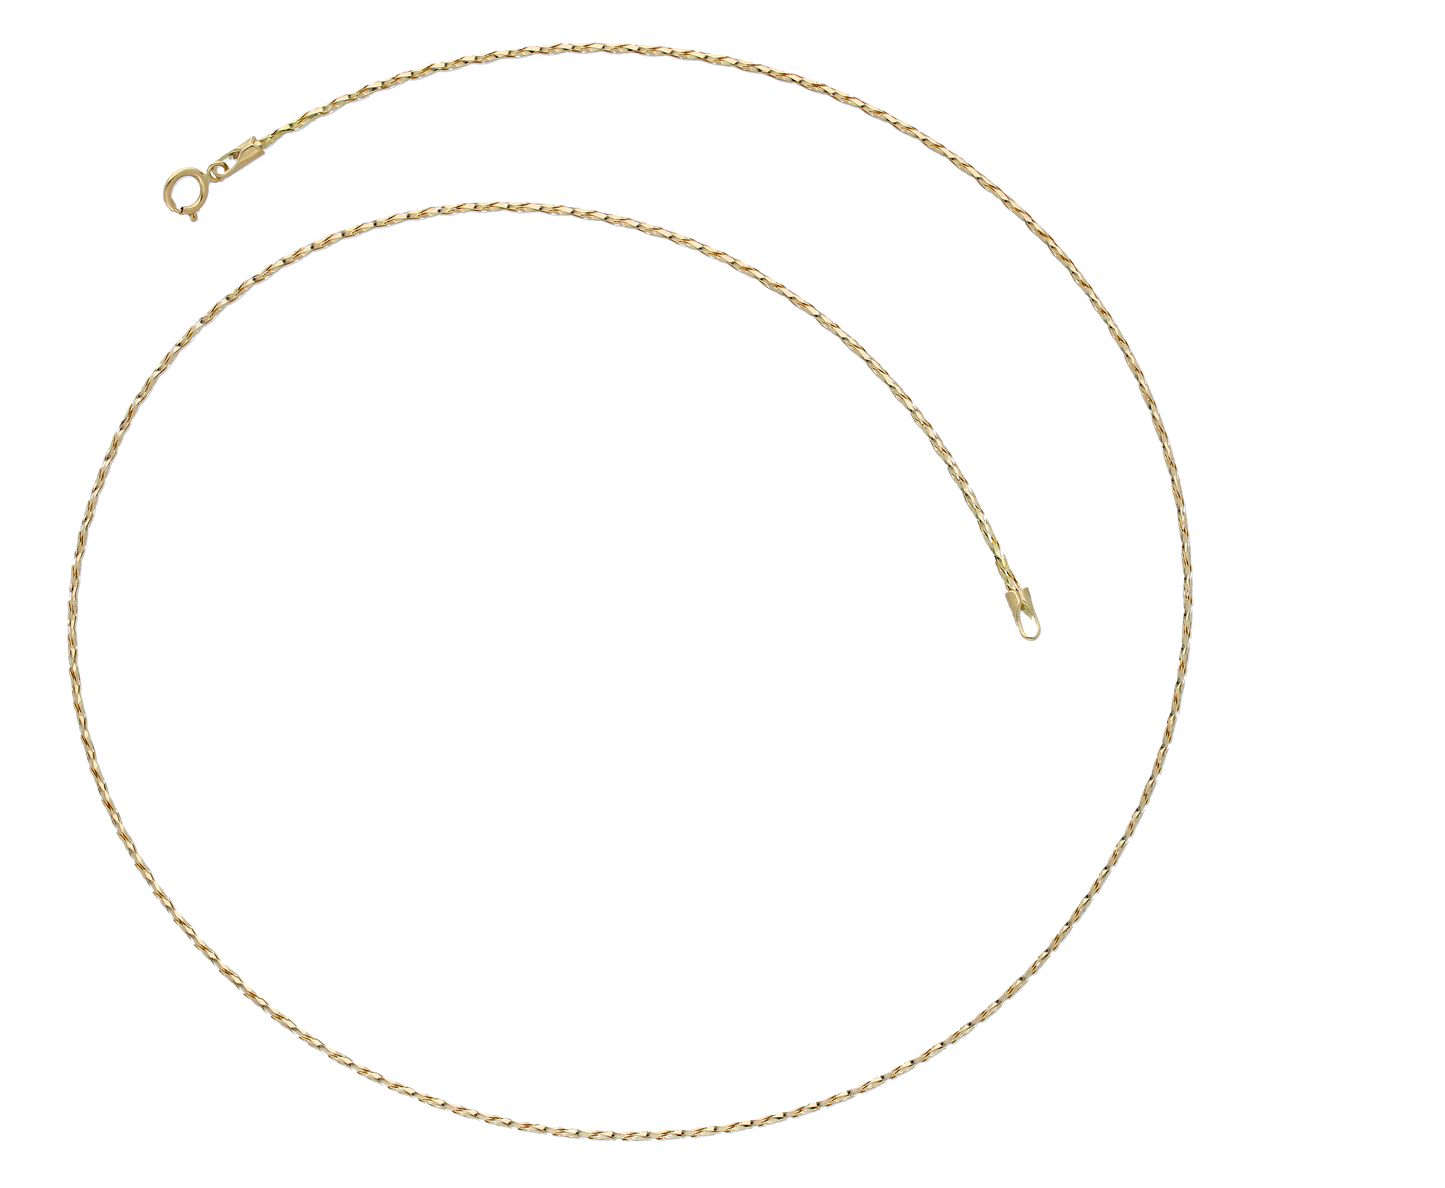 Gold 18 Inches Chain in 18KT - FKJCN18KU6308